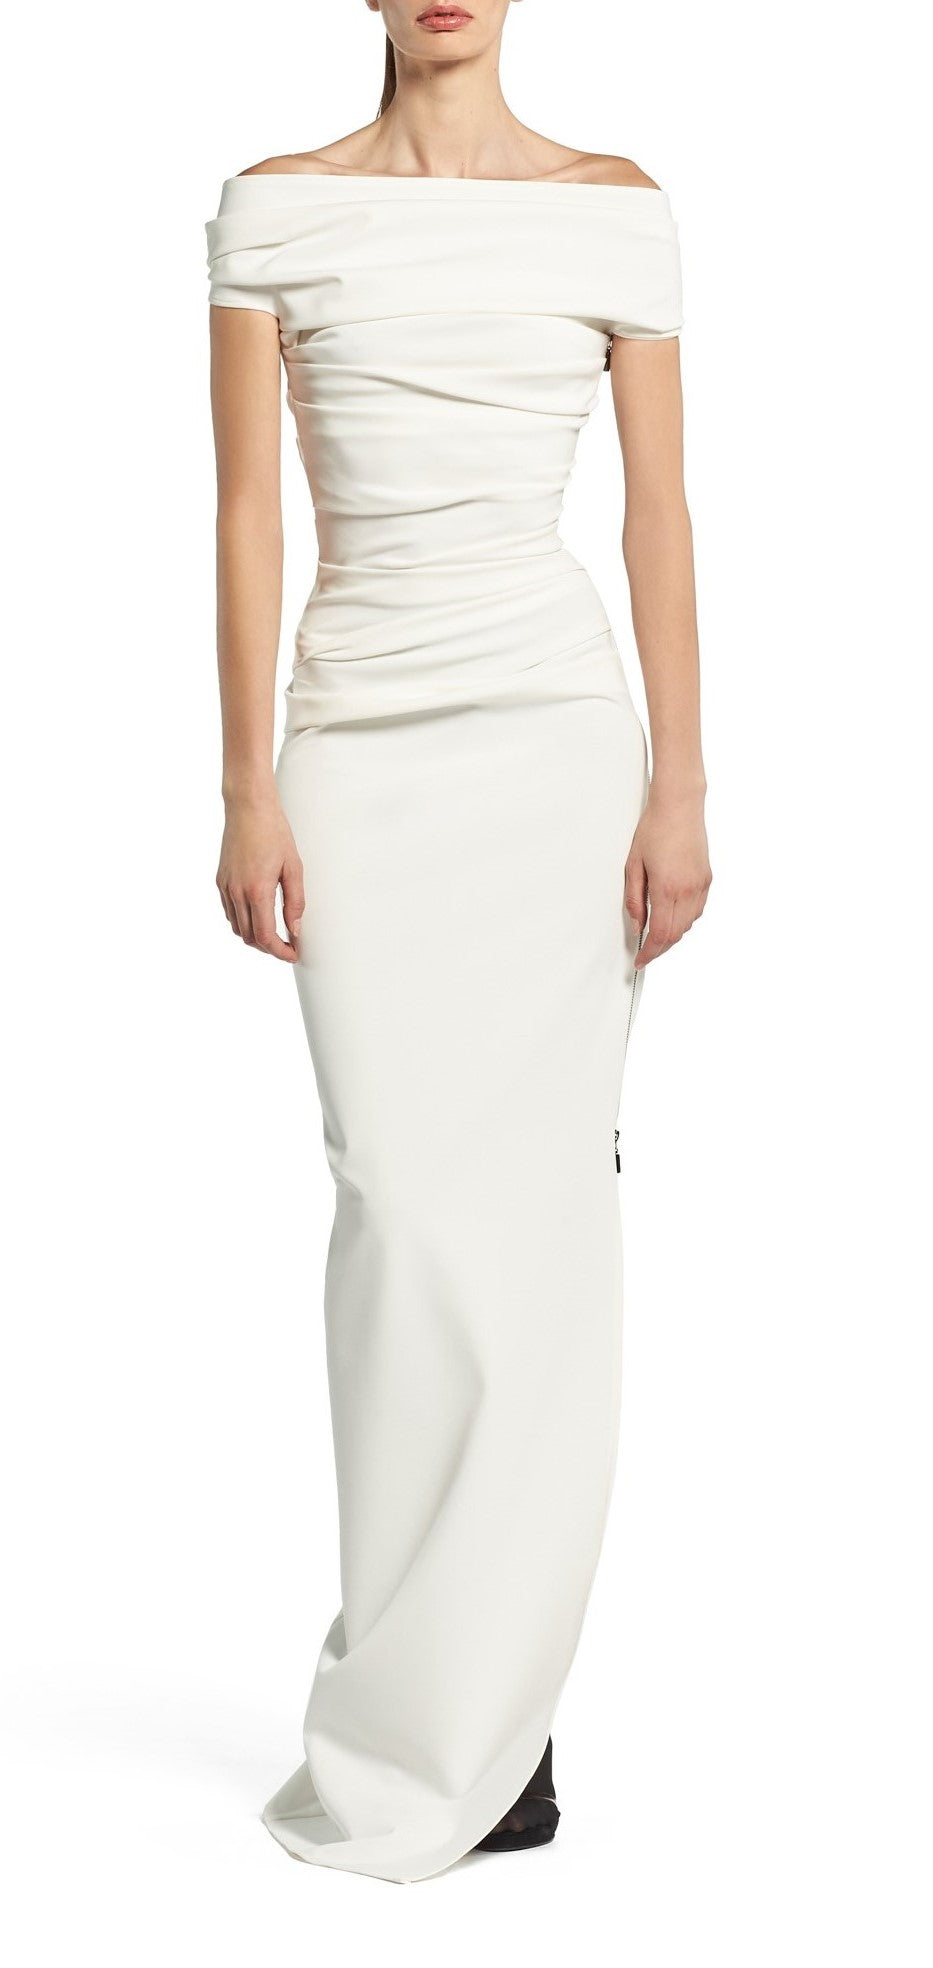 Toni Maticevski Assertion gown. Off the shoulder rouched fitted wedding dress.